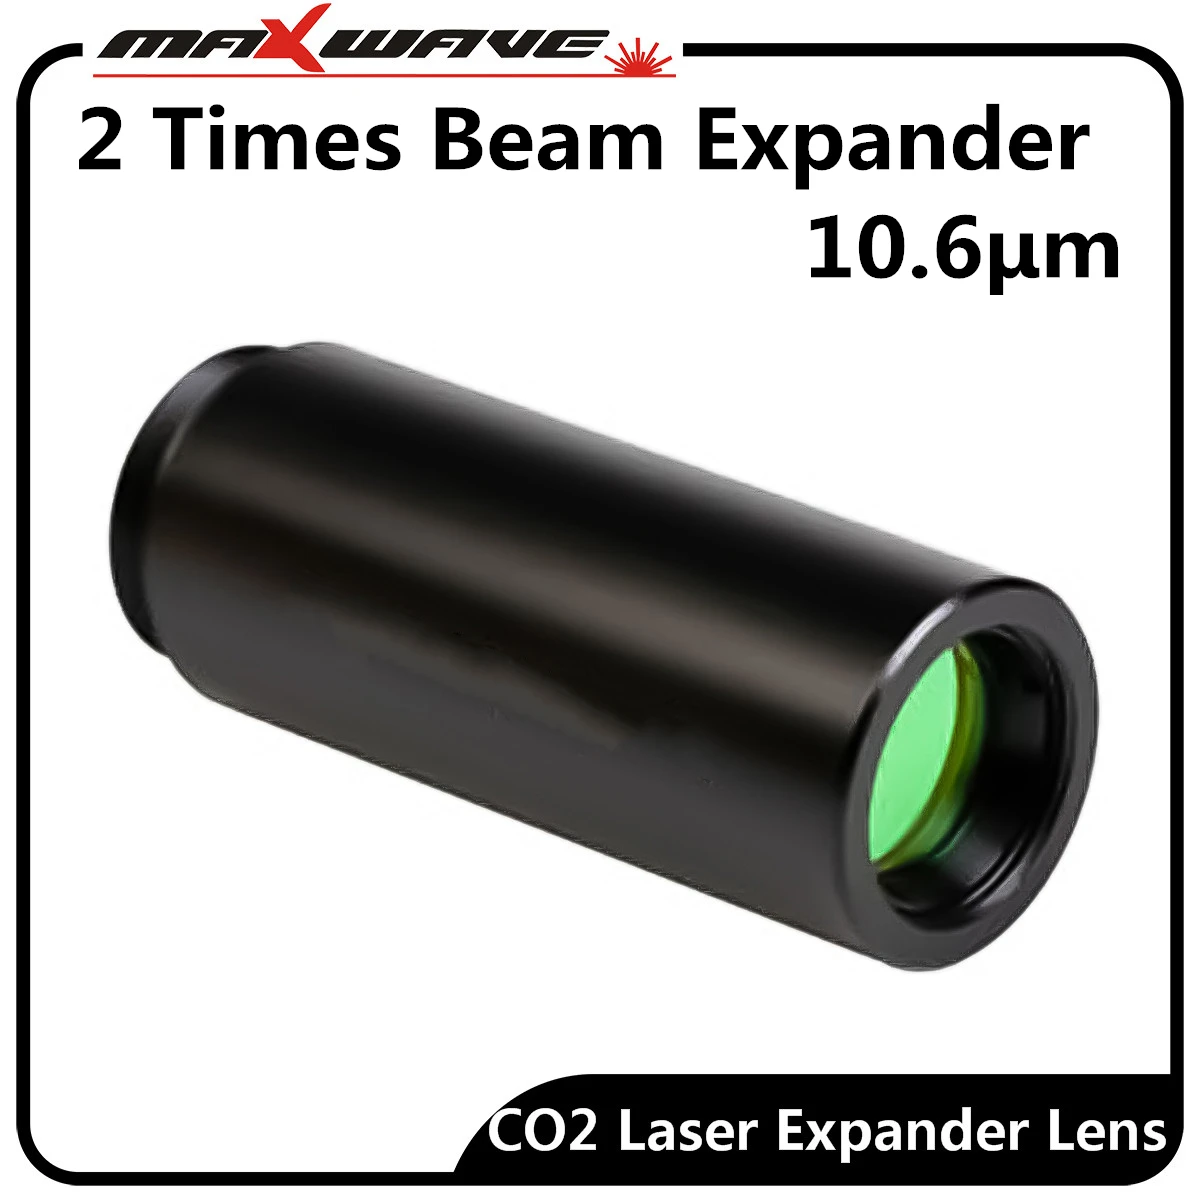 

CO2 Laser Beam Expander Lens 2X 10.6um Fixed Series 2 Times Expander Use For CO2 Laser Mark Machine